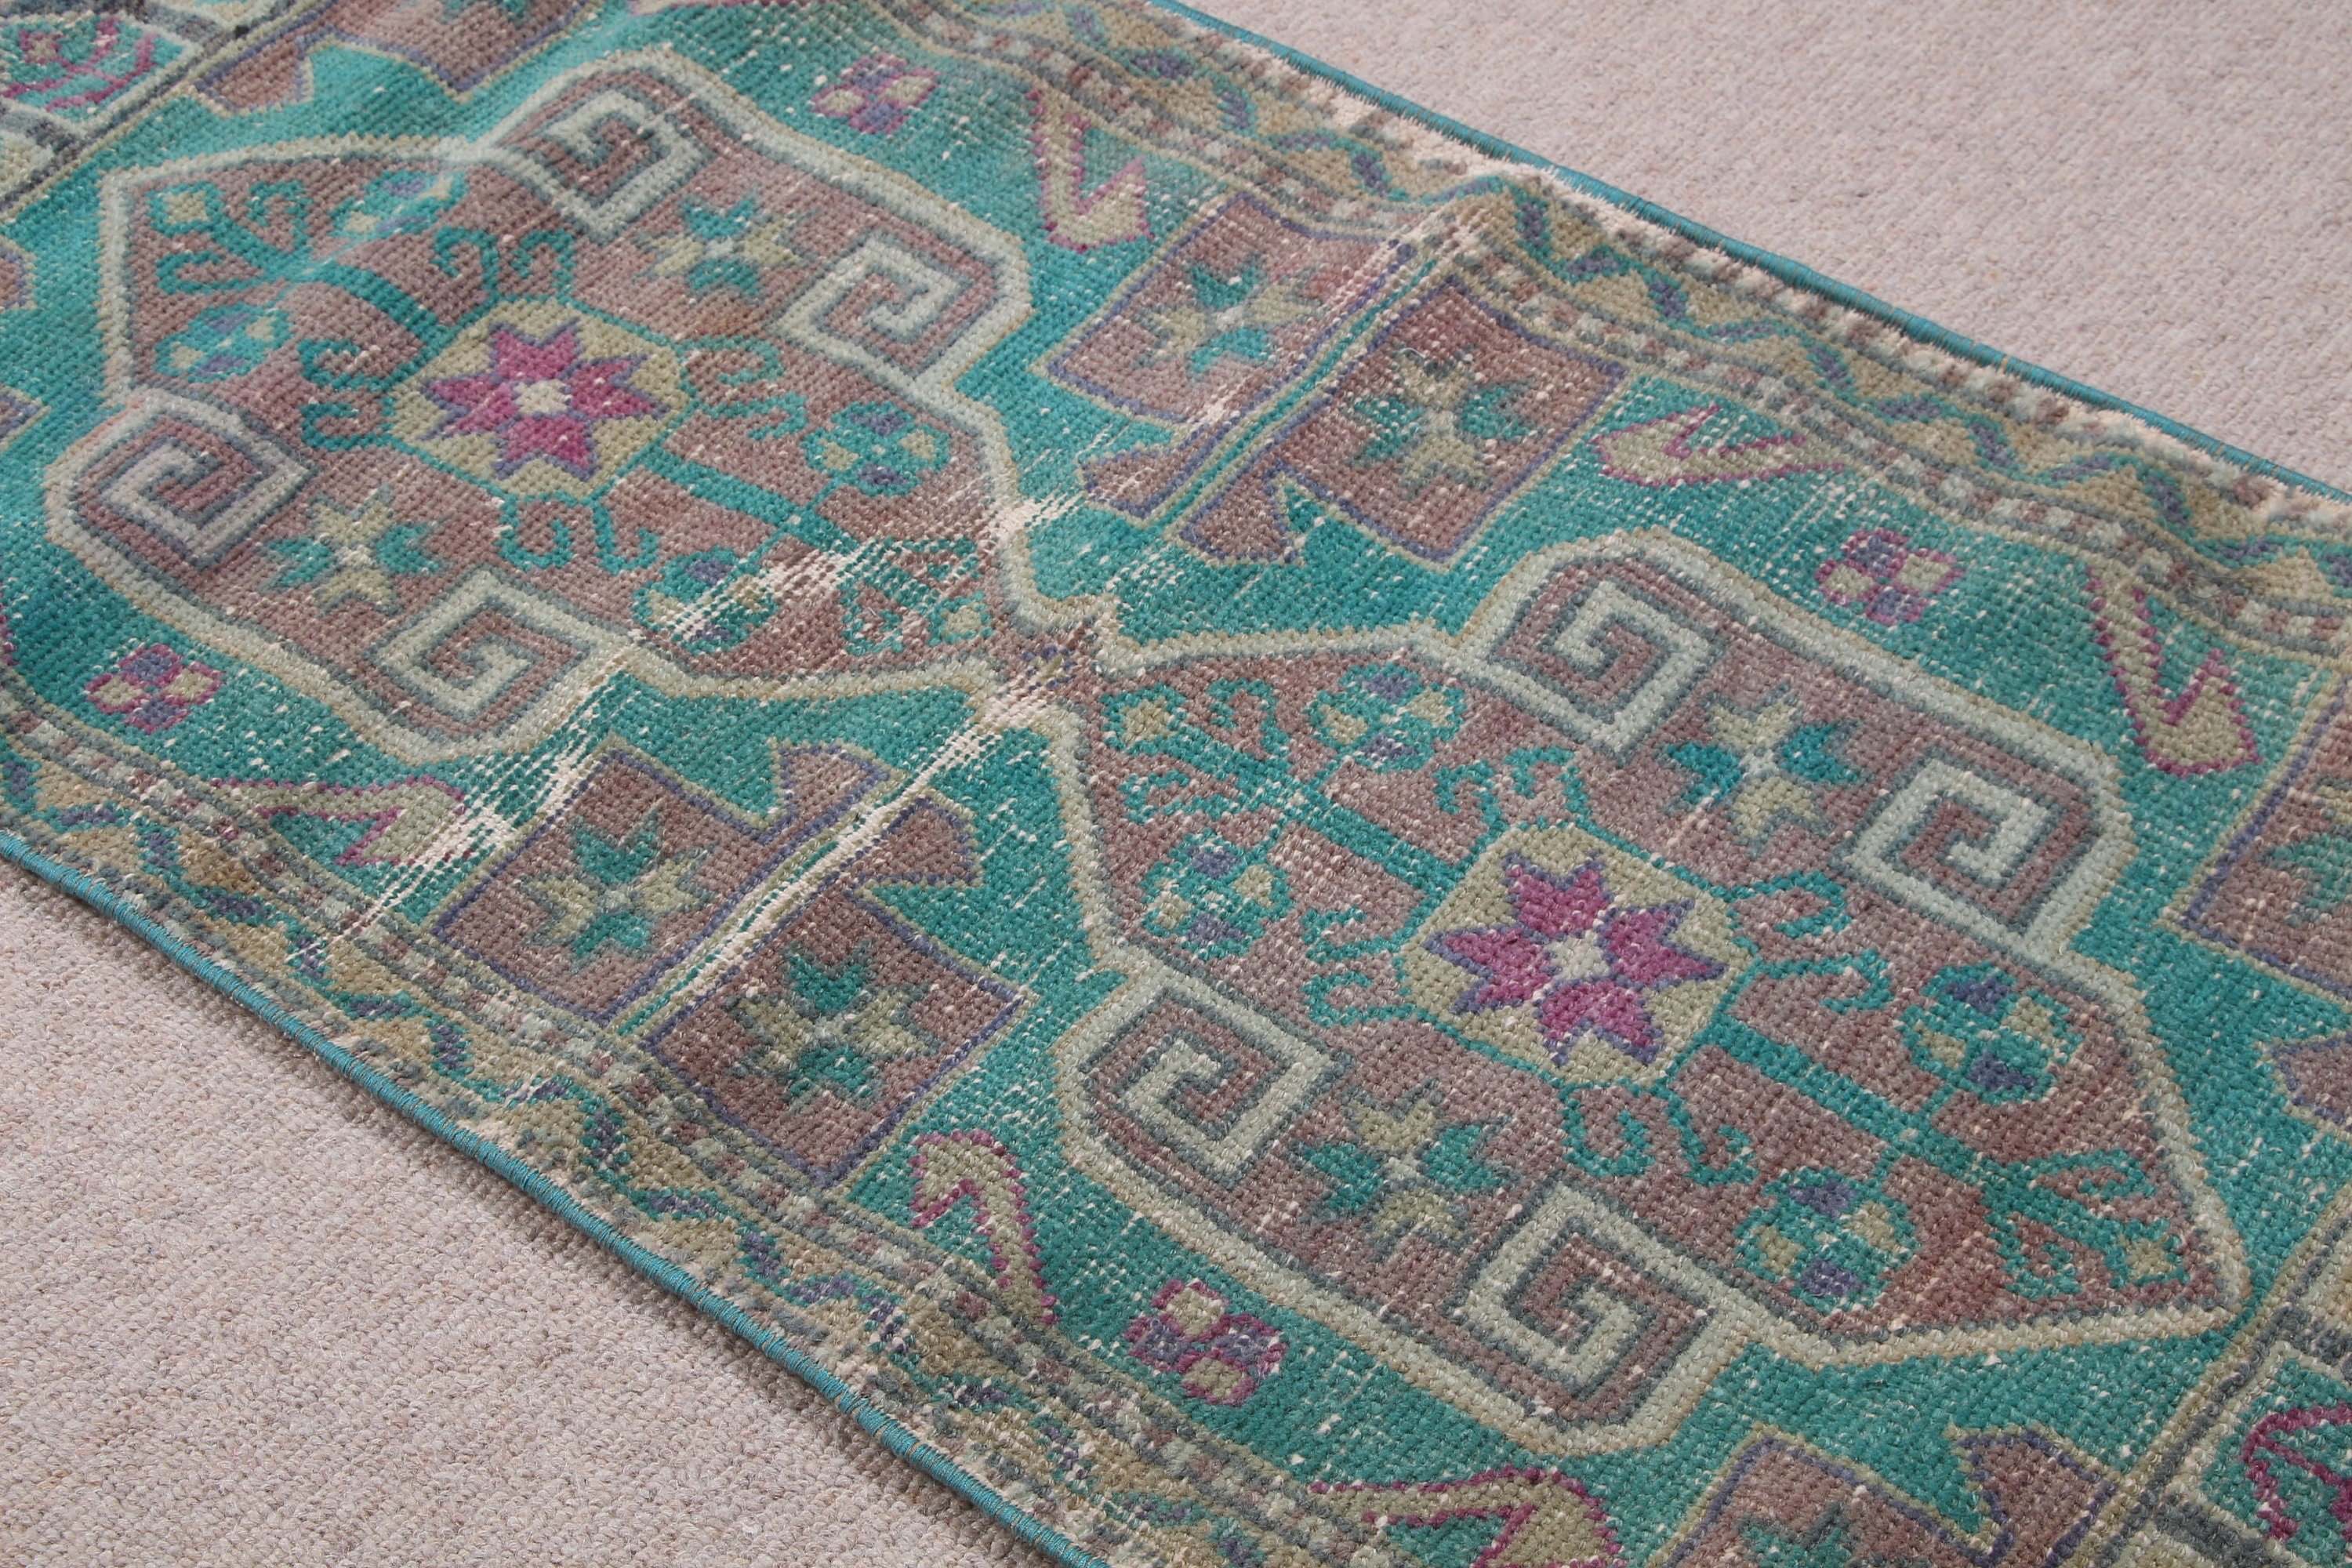 Bedroom Rug, Turkish Rug, 1.7x3.6 ft Small Rugs, Rugs for Car Mat, Car Mat Rug, Kitchen Rug, Green Home Decor Rugs, Cool Rug, Vintage Rugs